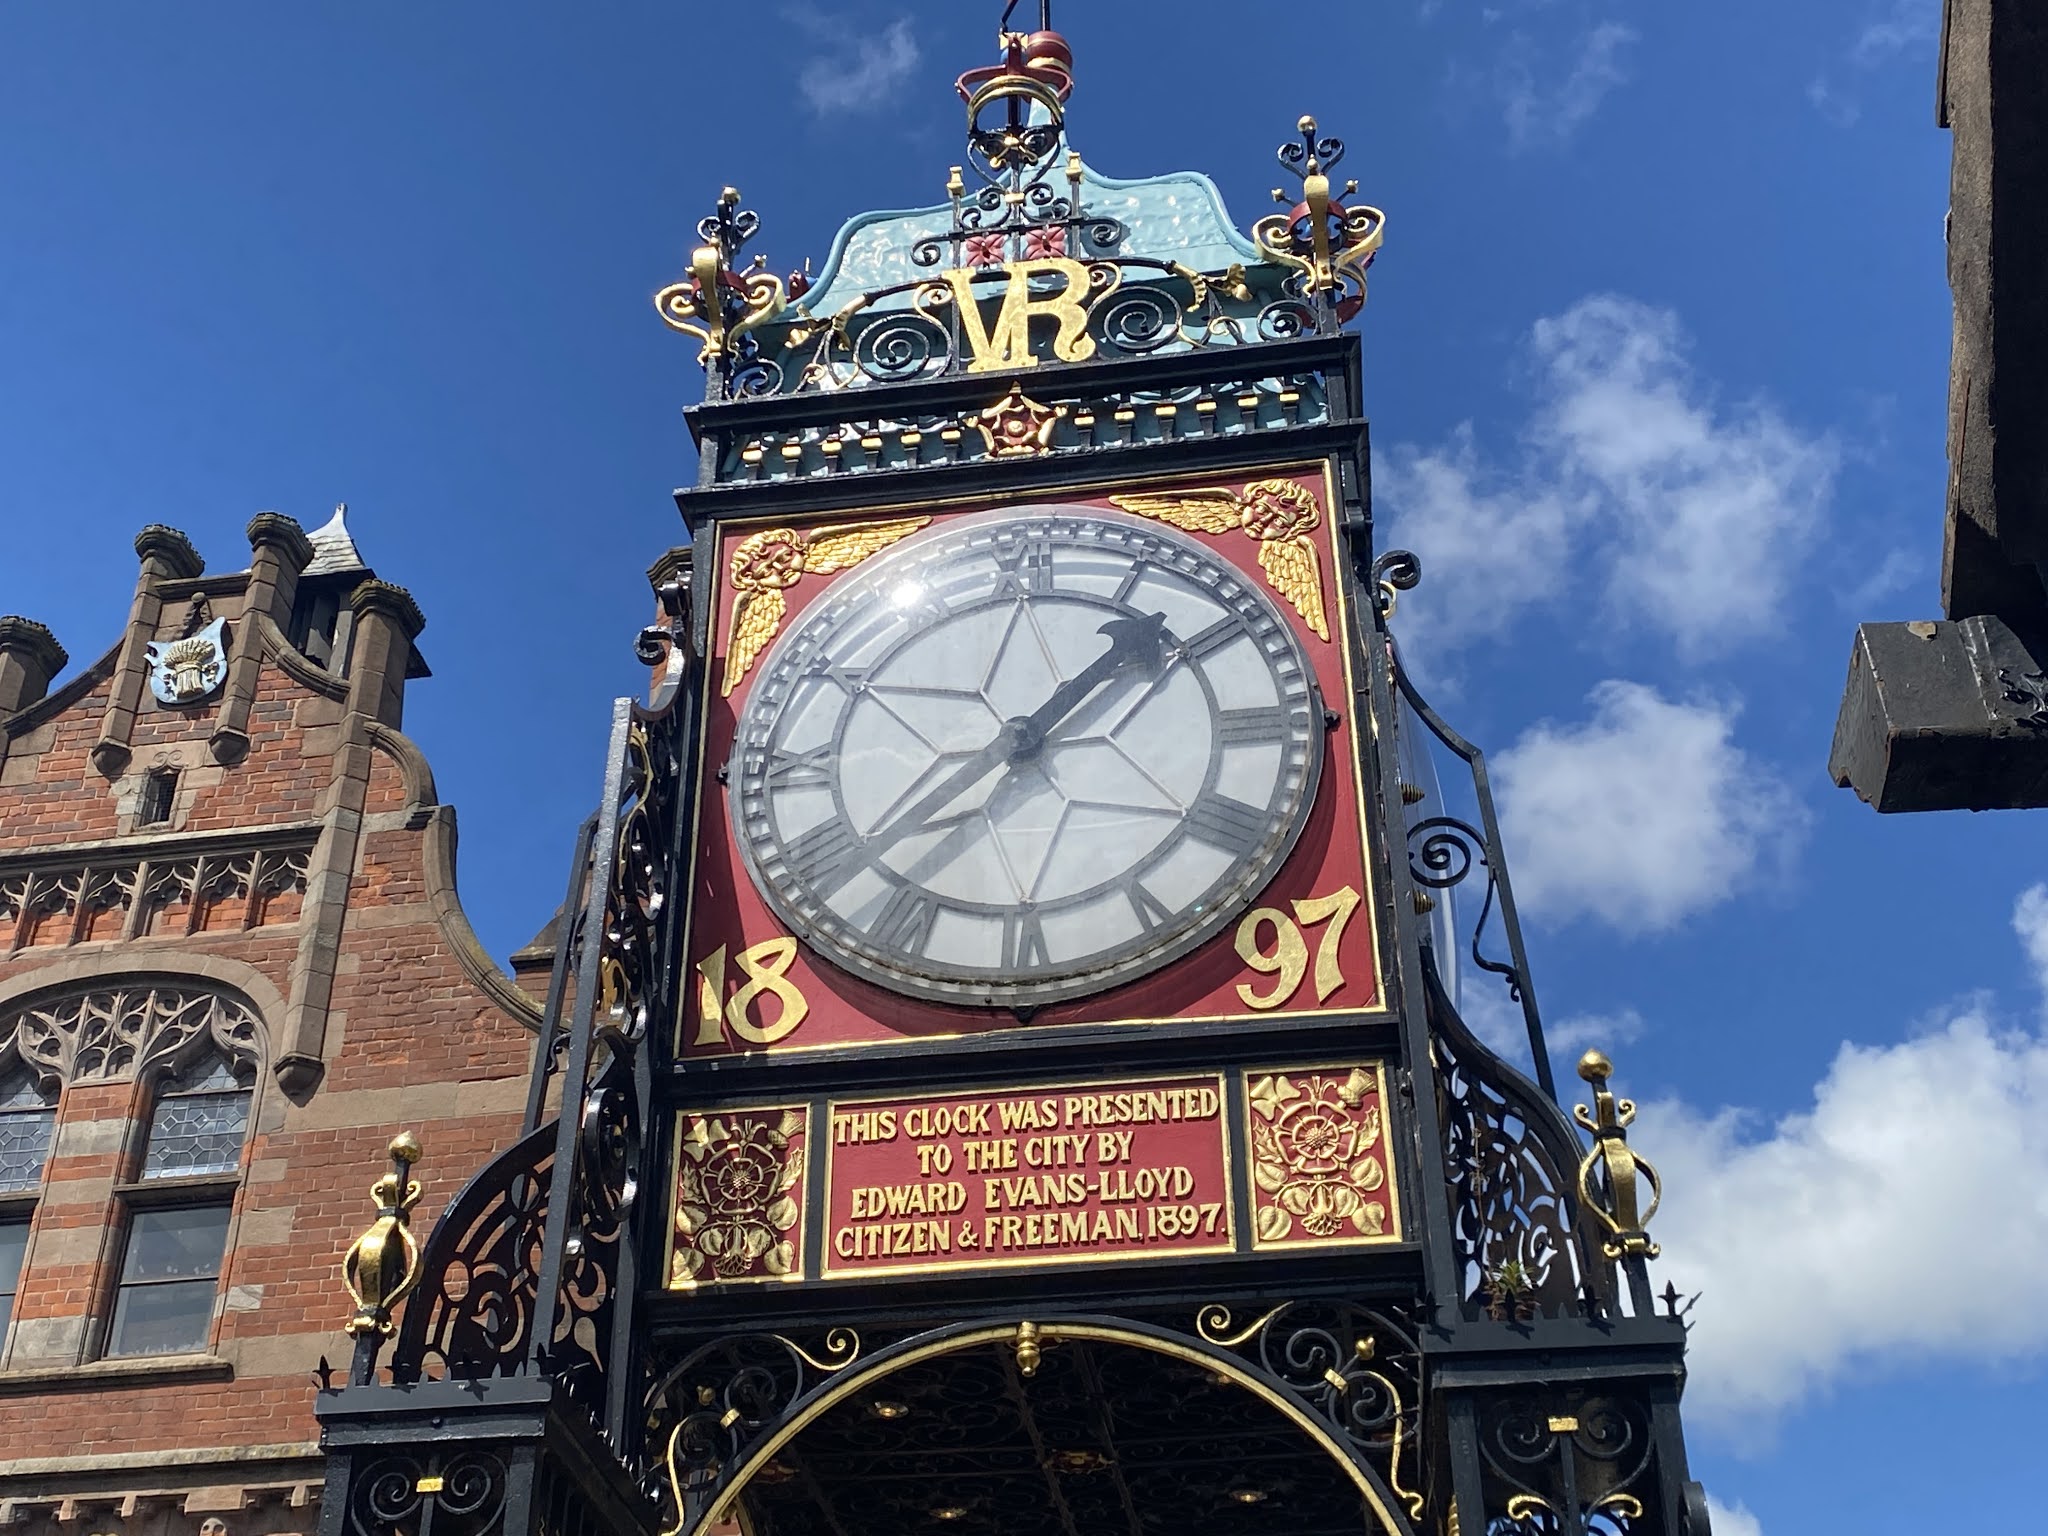 Eastgate Clock in Chester